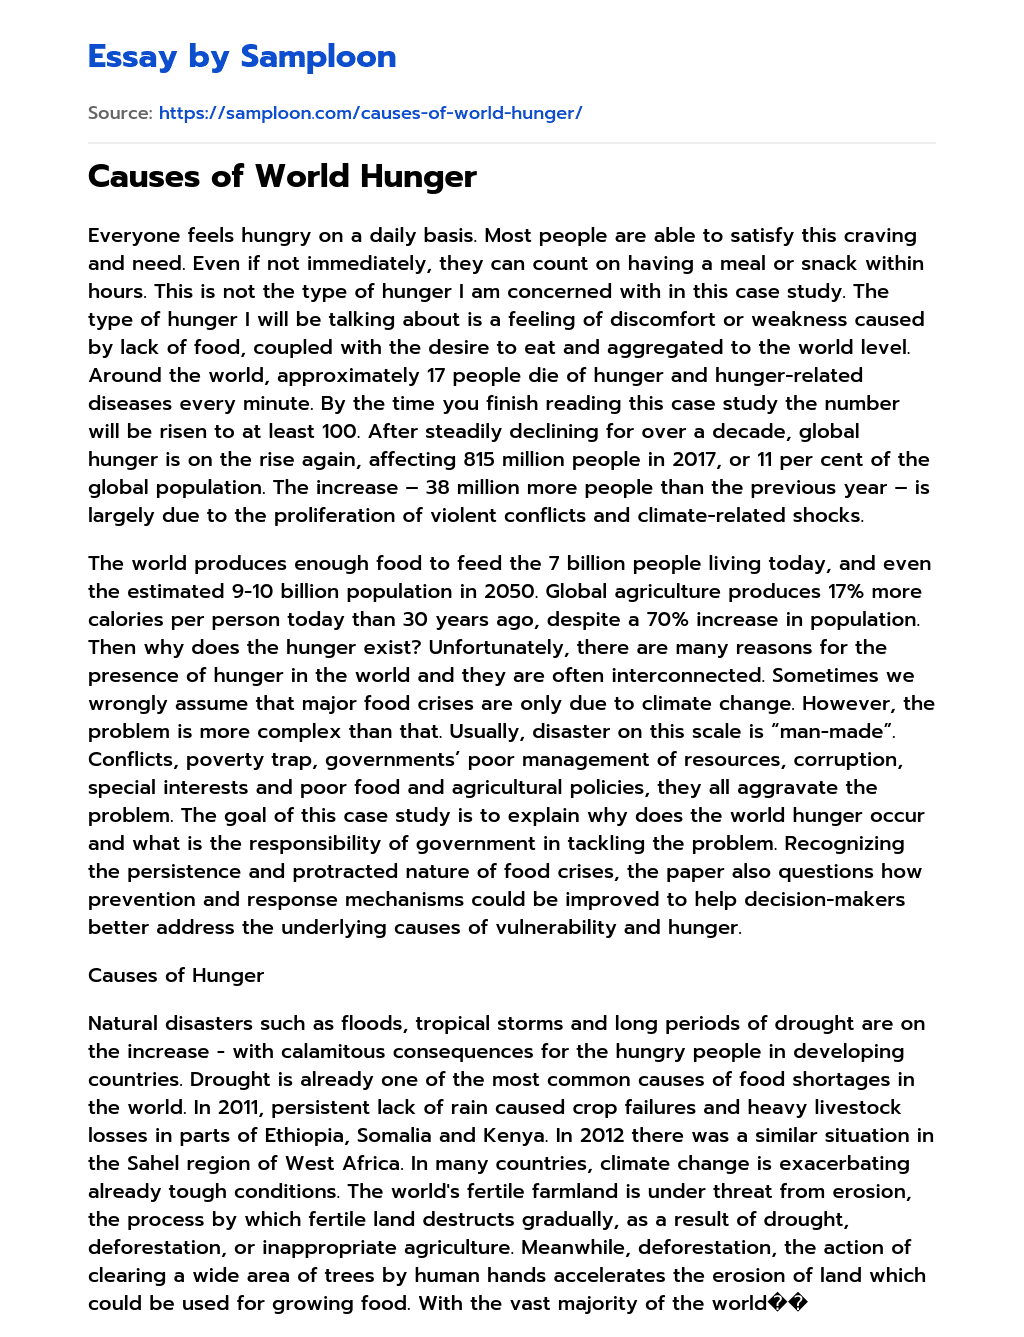 Causes of World Hunger essay